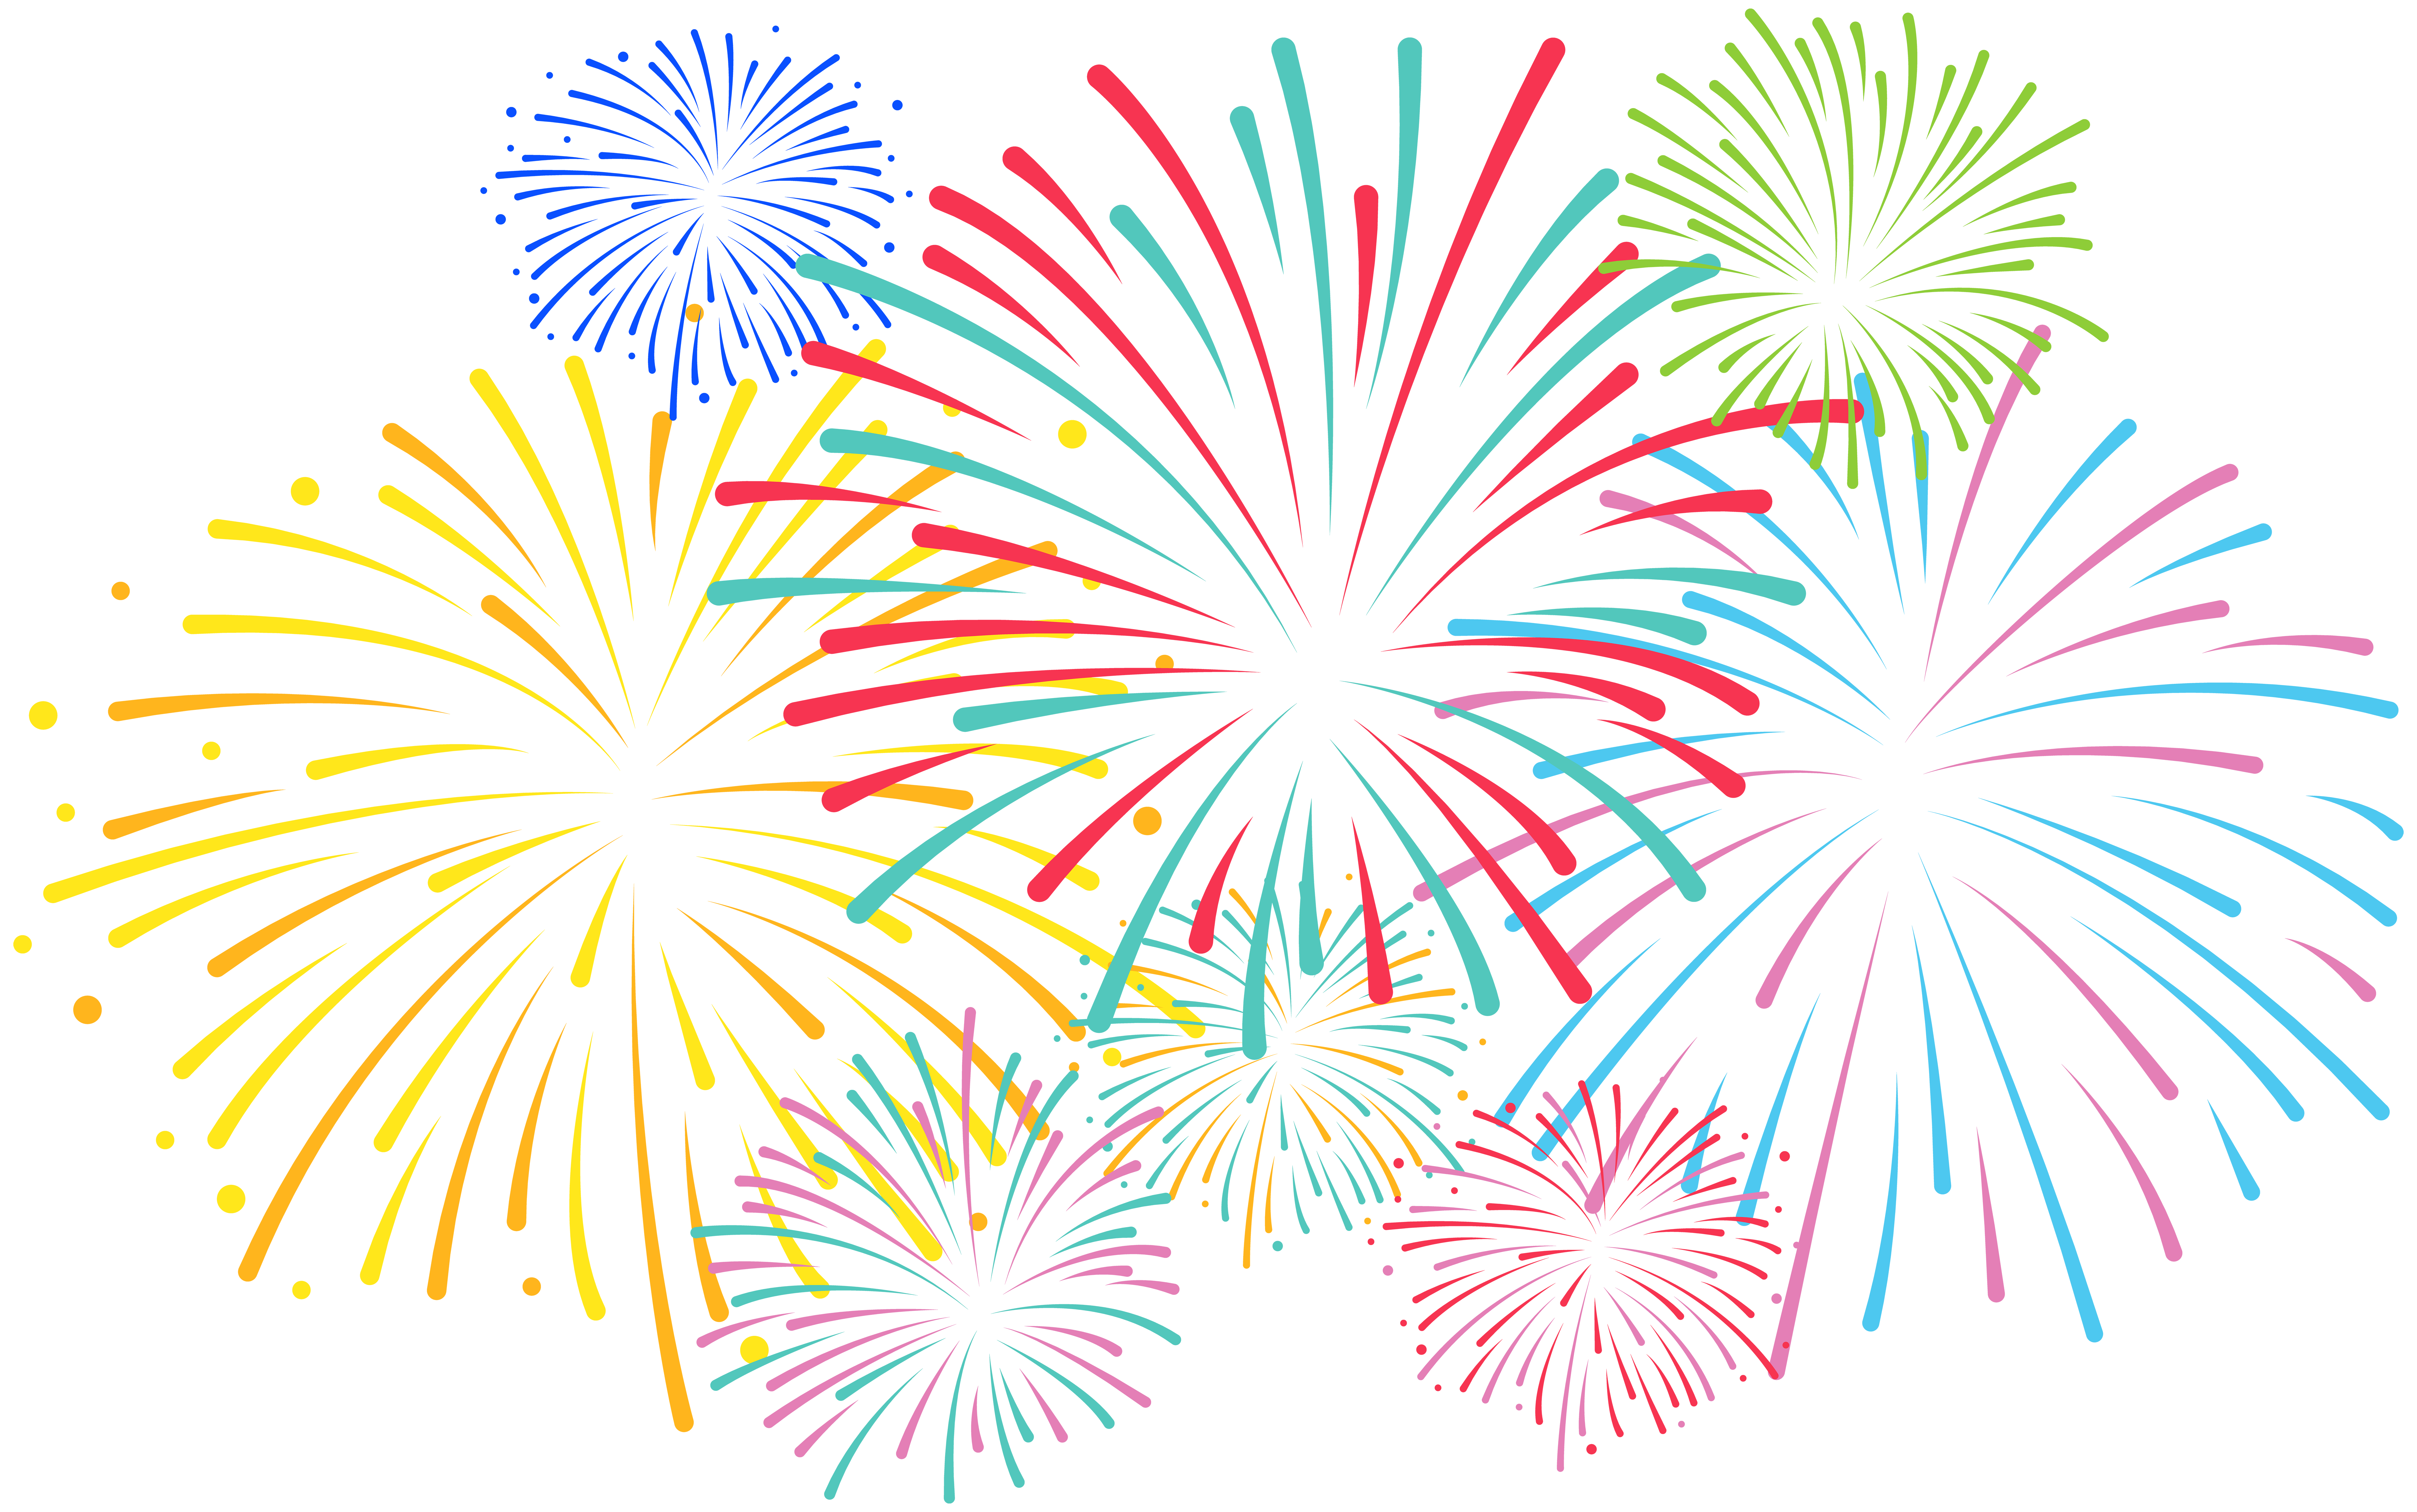 Transparent clip art gallery. Fireworks clipart candy